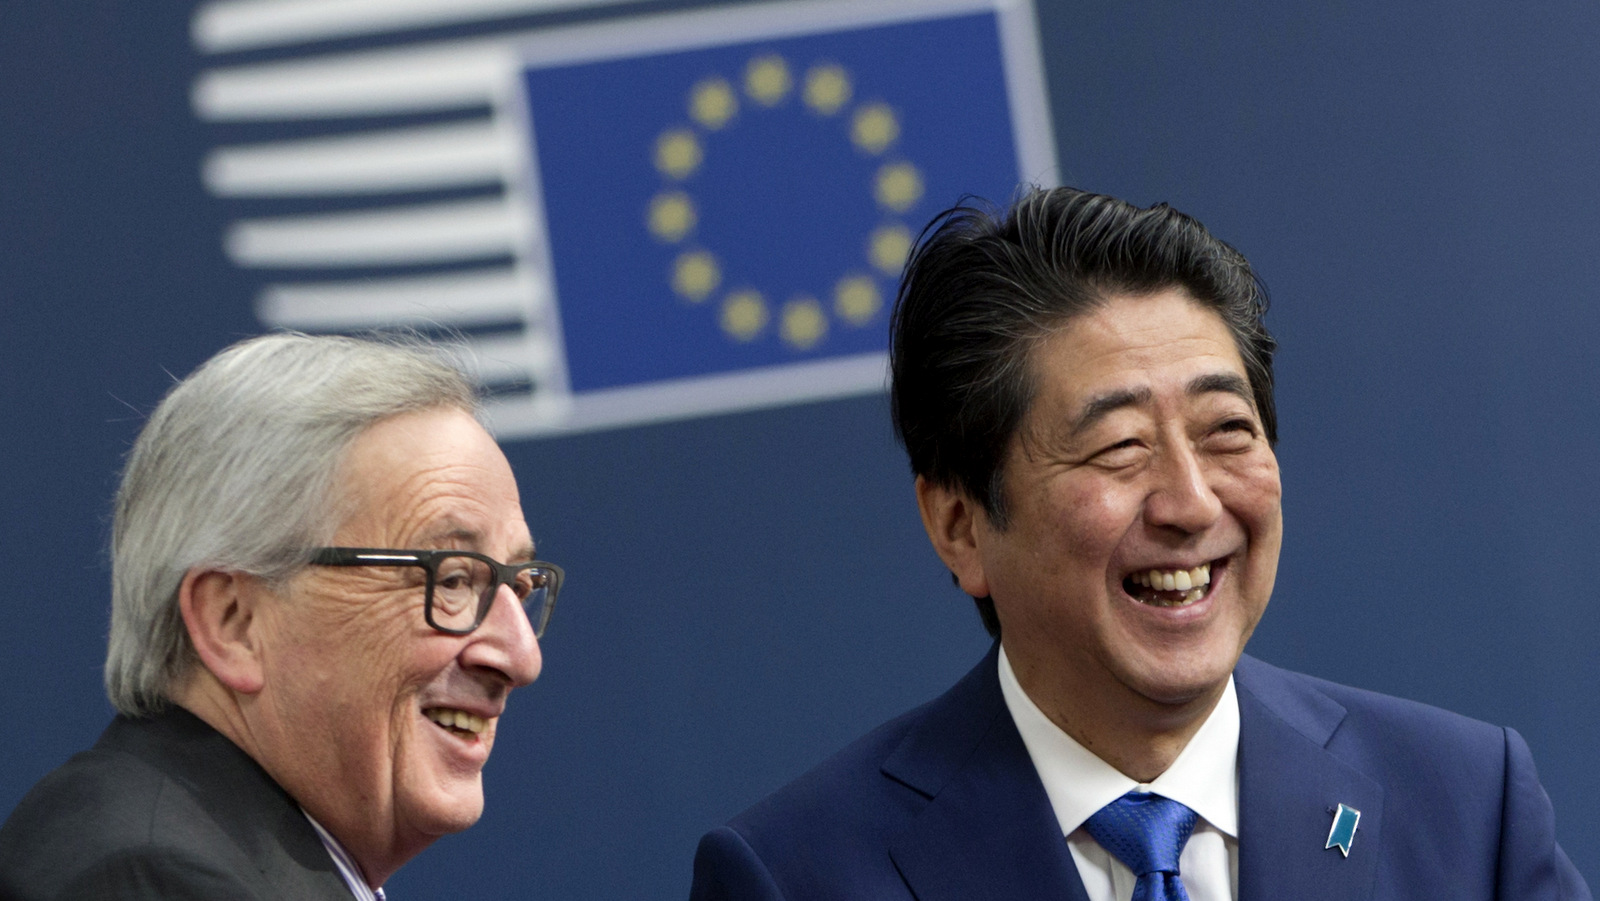 European Commission President Jean-Claude Juncker, left, greets Japanese Prime Minister Shinzo Abe on arrival at the Europa building in Brussels, March 21, 2017. (AP/Virginia Mayo)